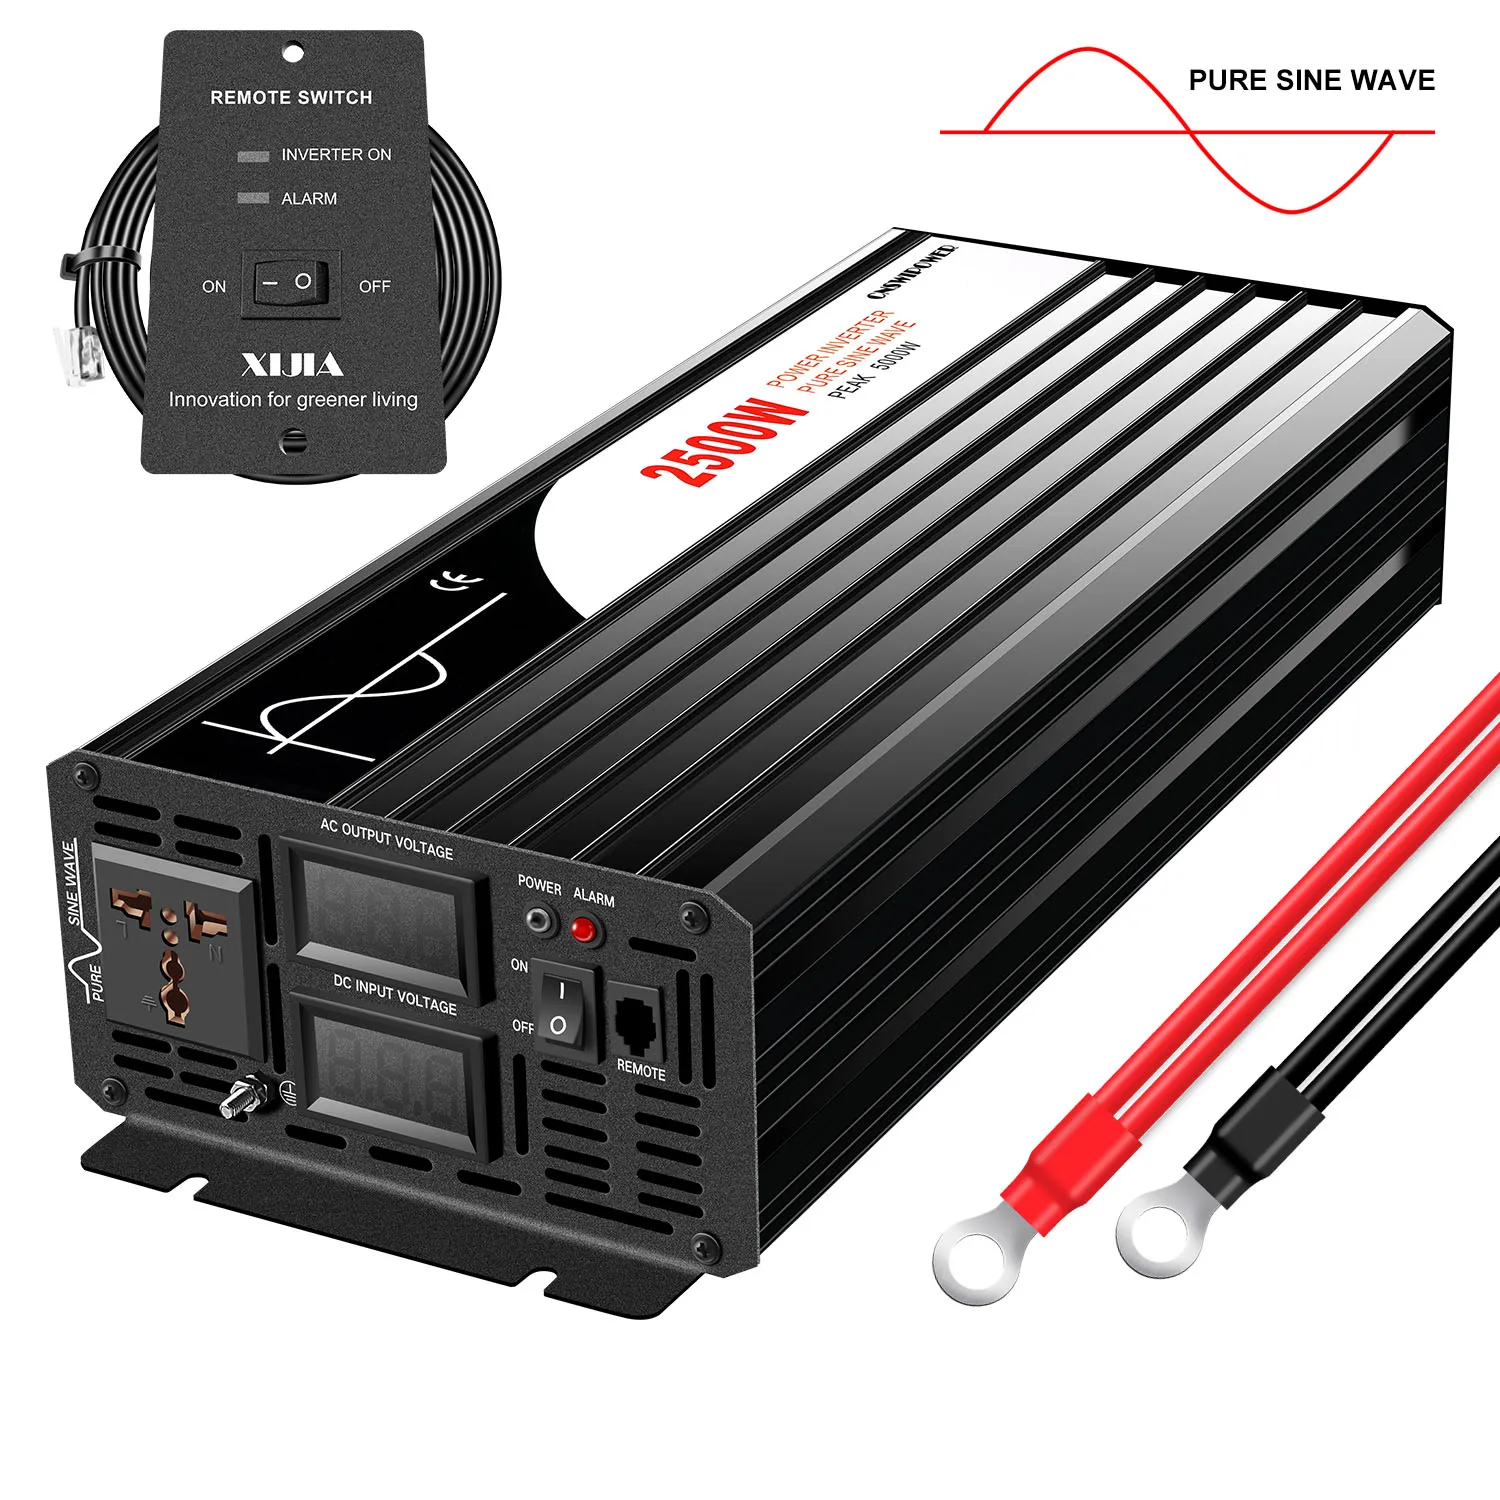 Thuisland Exclusief bereik 2500w inverter solar power system home, View solar power system home,  swipower Product Details from Yueqing Swipower Technology Co., Ltd. on  Alibaba.com